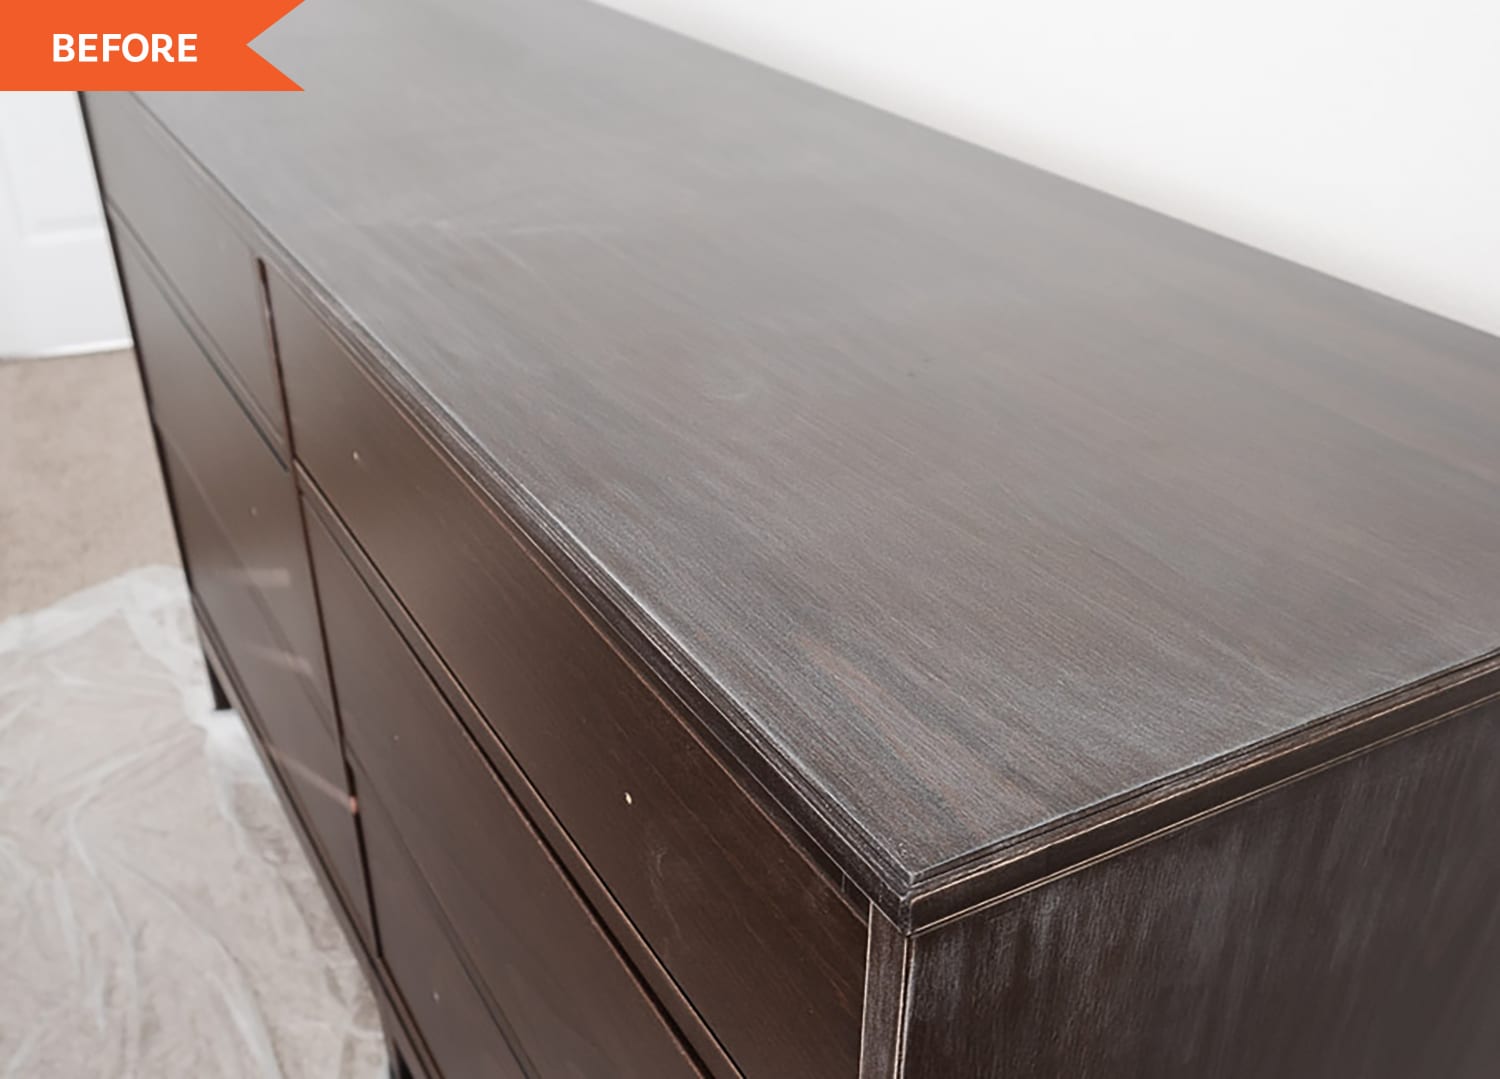 Before and After: An Easy $100 Hack Gives This Plain IKEA Dresser a Timeless, Sophisticated Look for Less